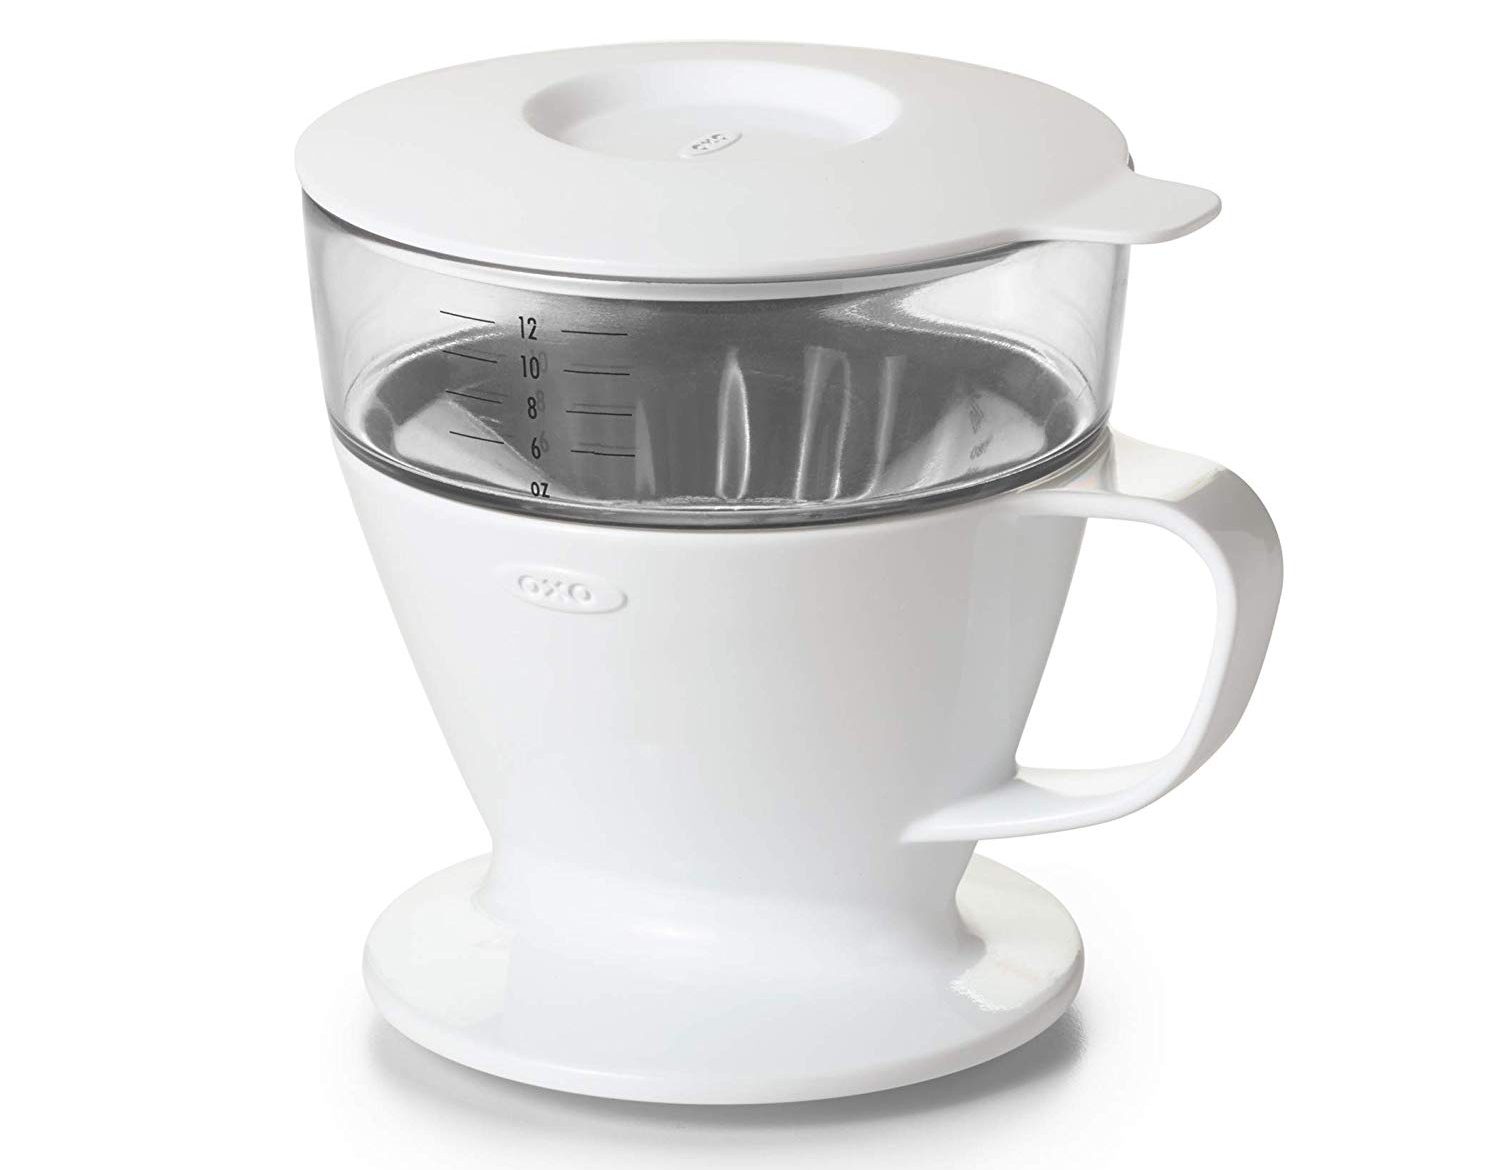 A Single-Serve To Pour-Over Coffee Dripper